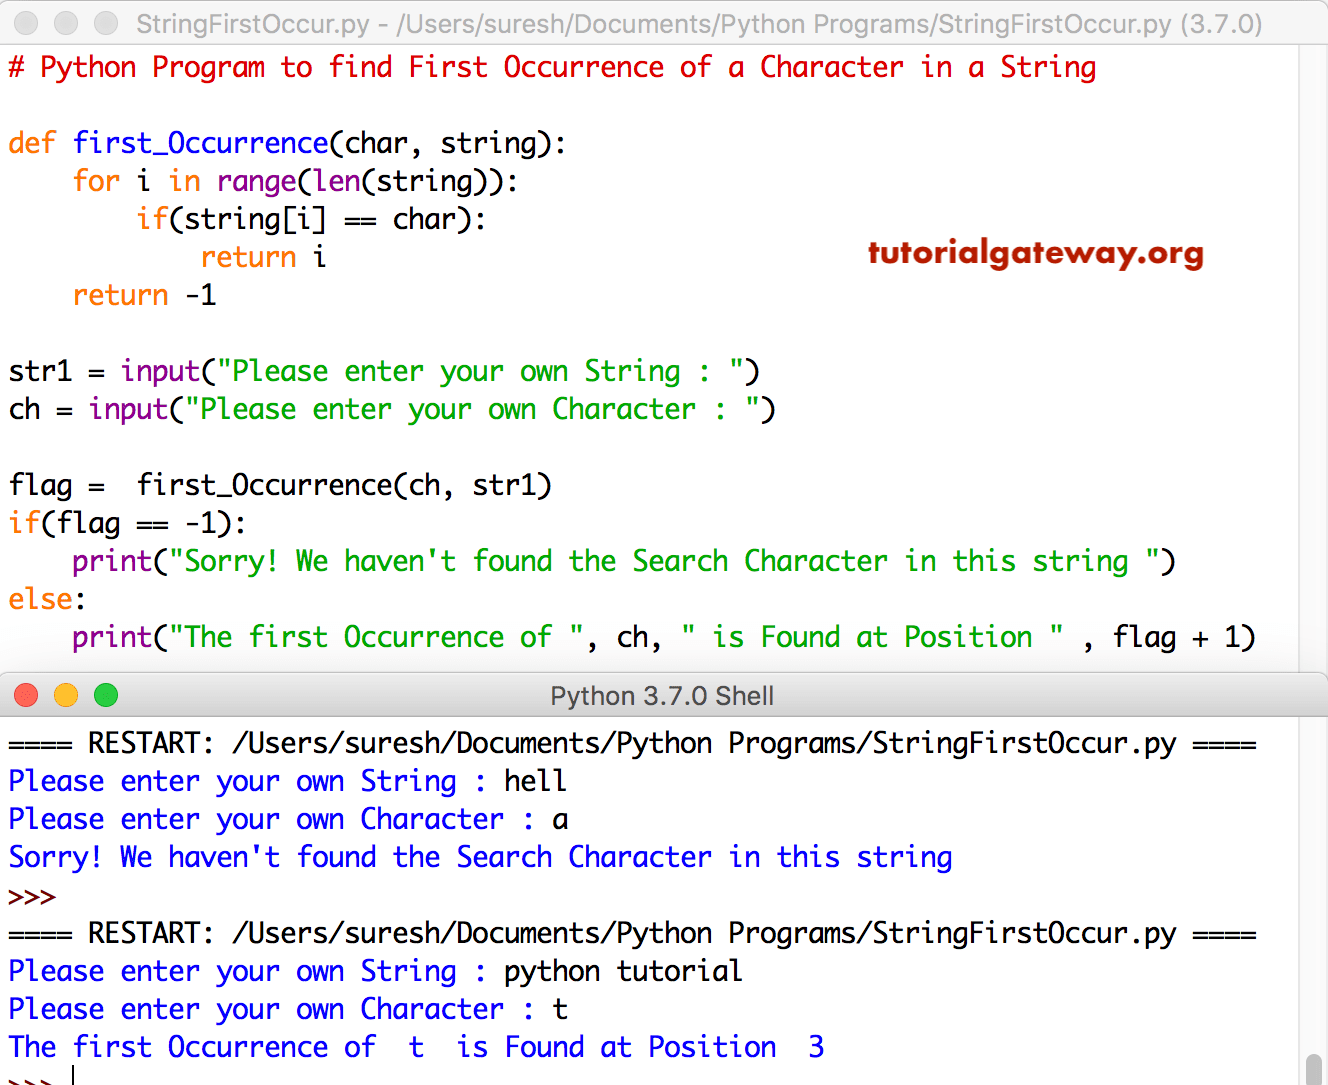 Python Program to find First Occurrence of a Character in a String 3